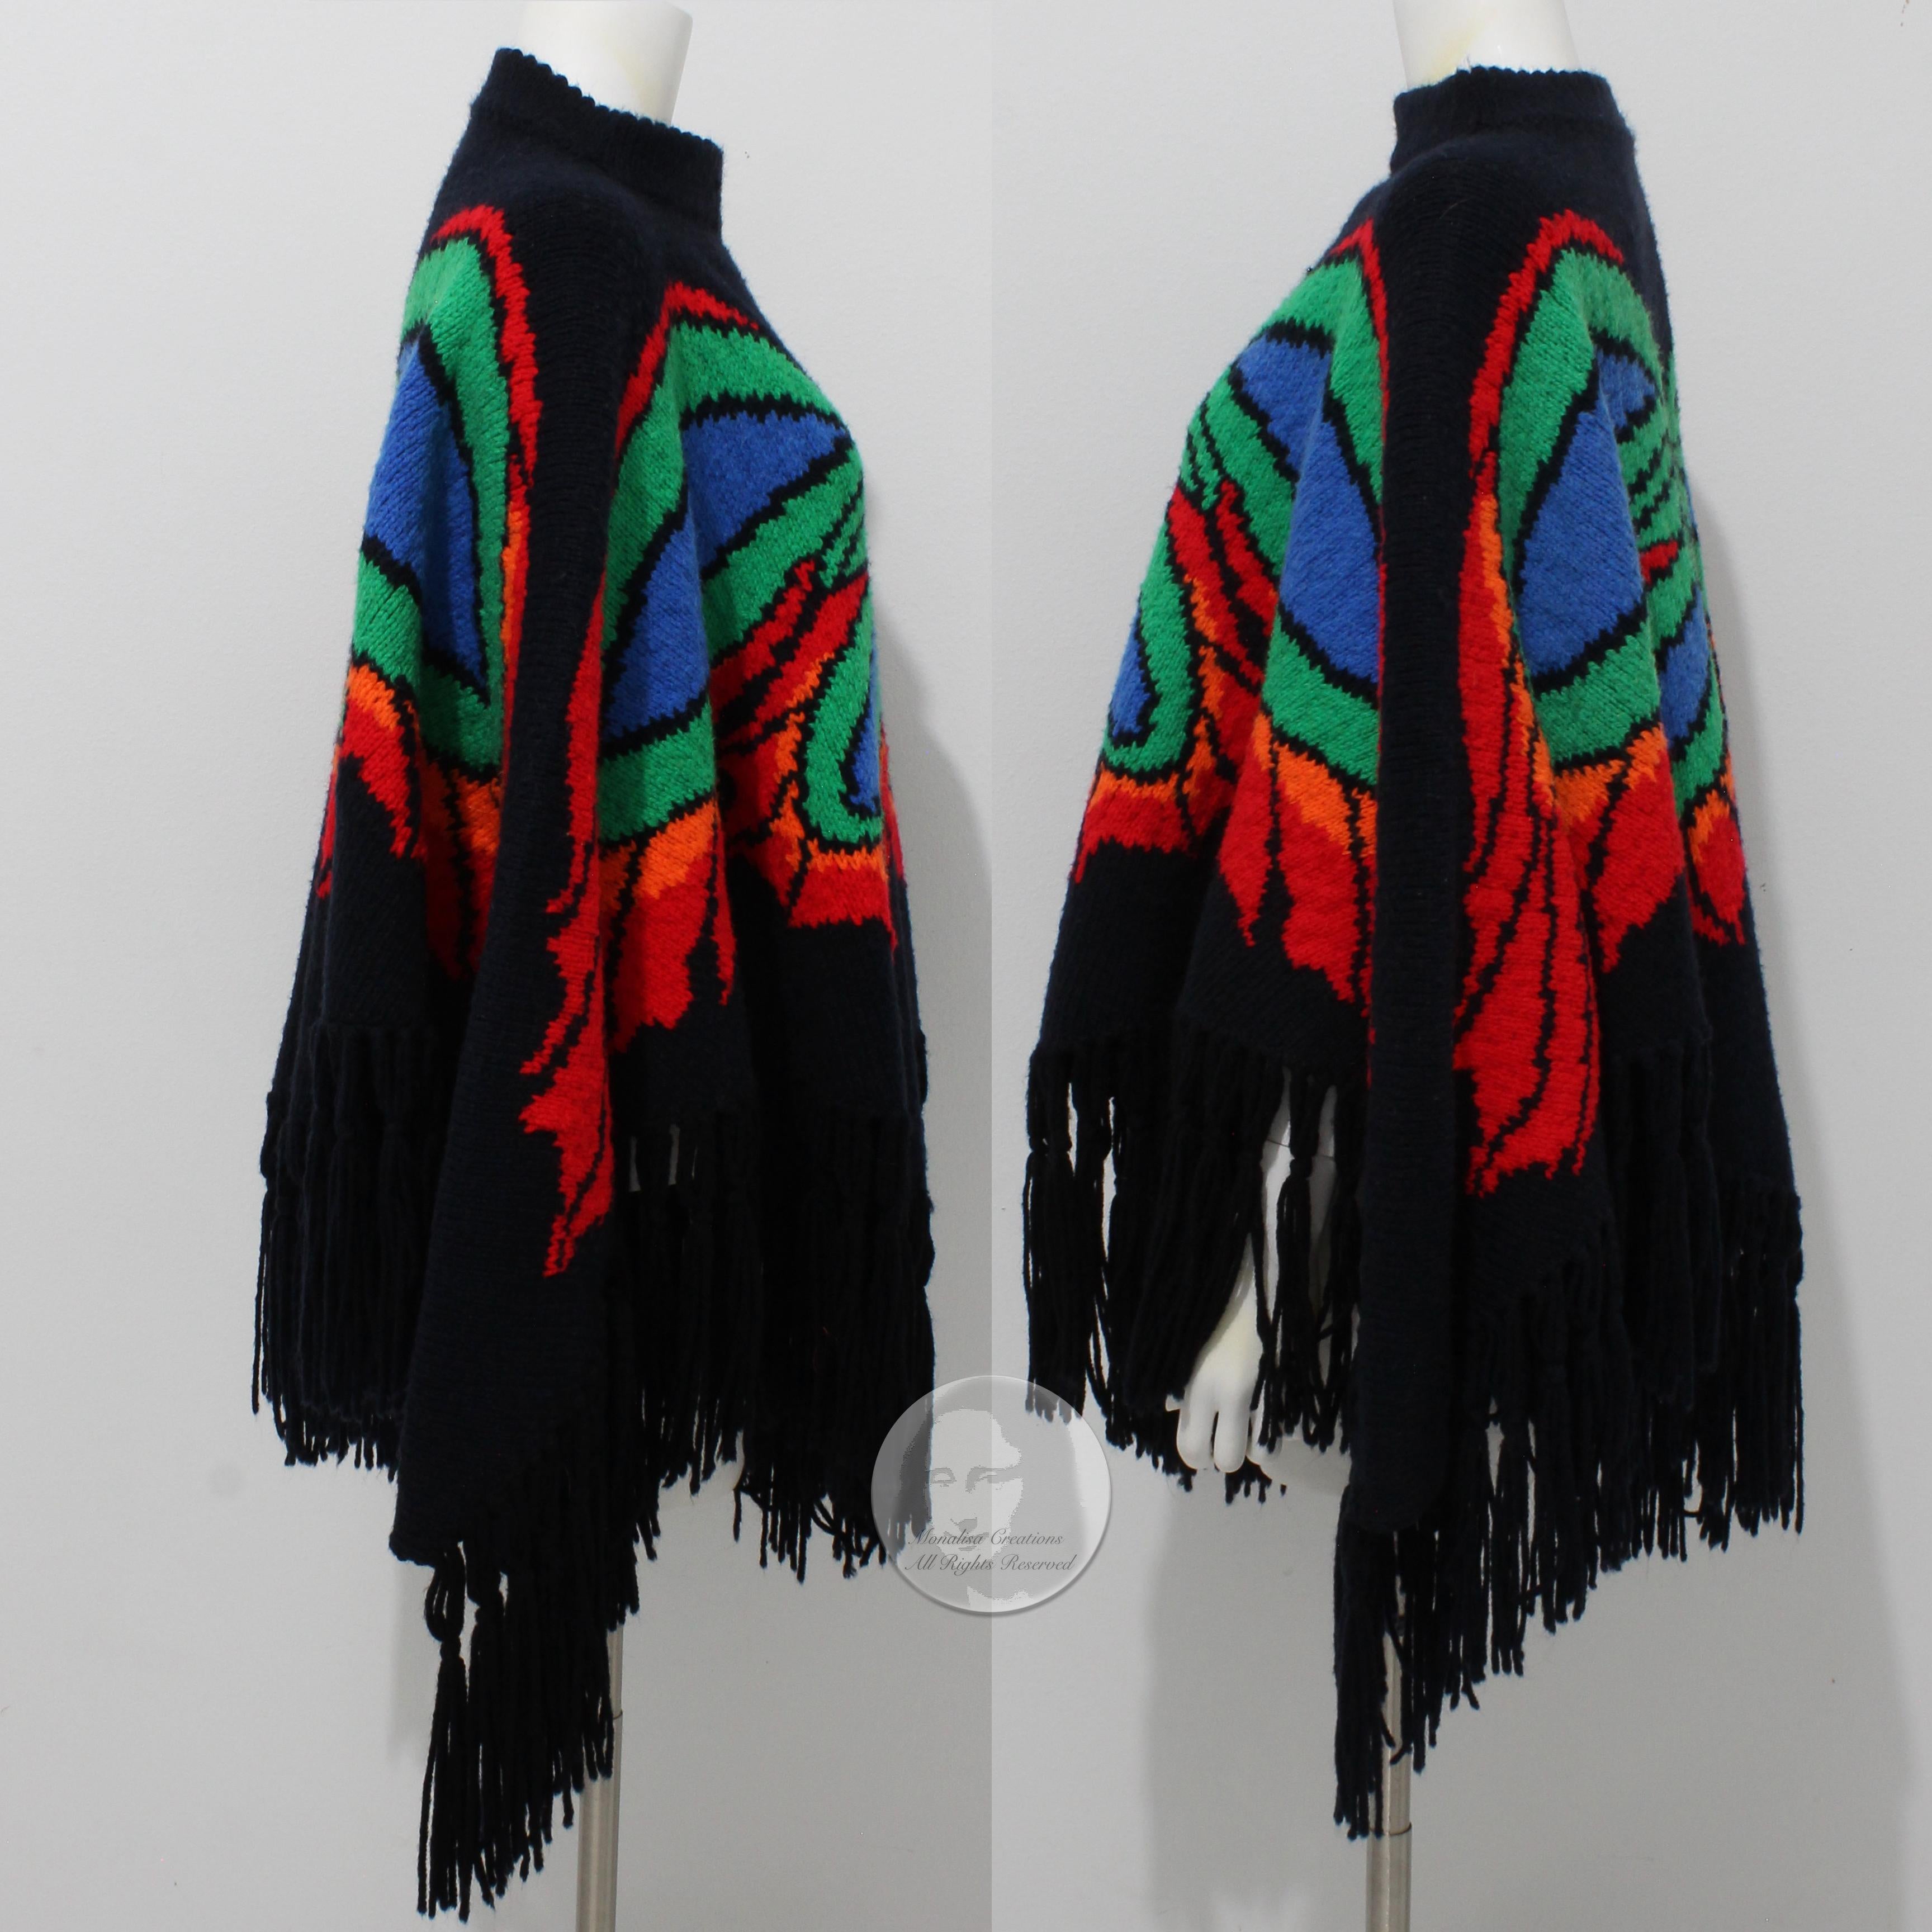 Women's or Men's Butterfly Poncho Multicolor Knit with Fringe Trim Pullover Style Vintage OSFM  For Sale